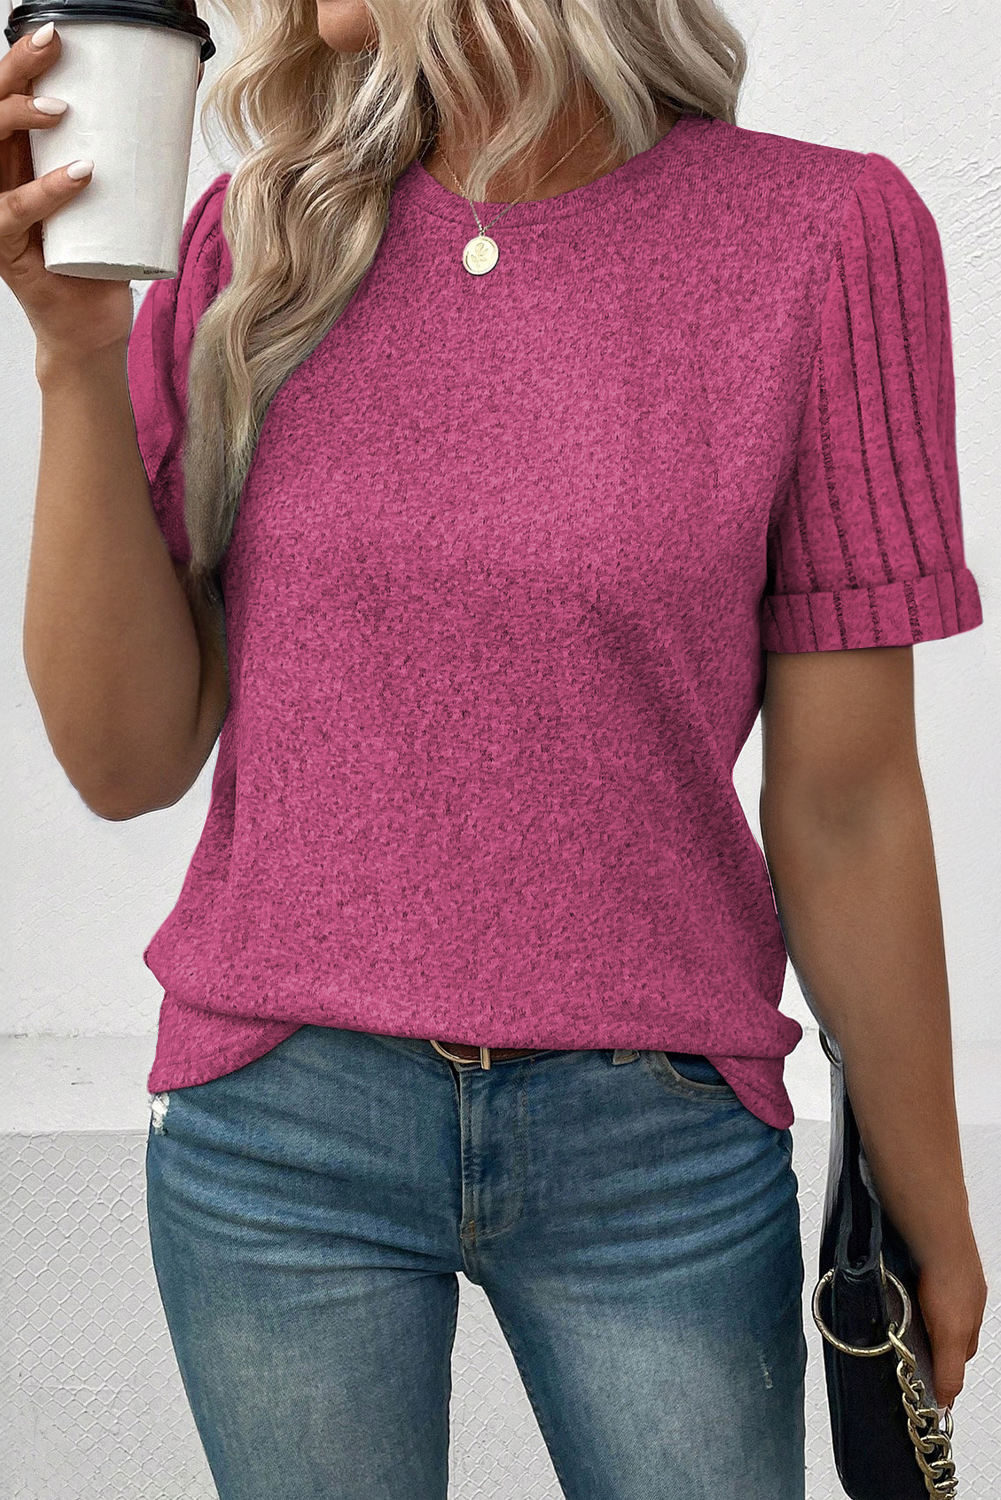 Shewin Wholesale Fall Bright Pink Ribbed Splicing Short Sleeve Round Neck T-SHIRT